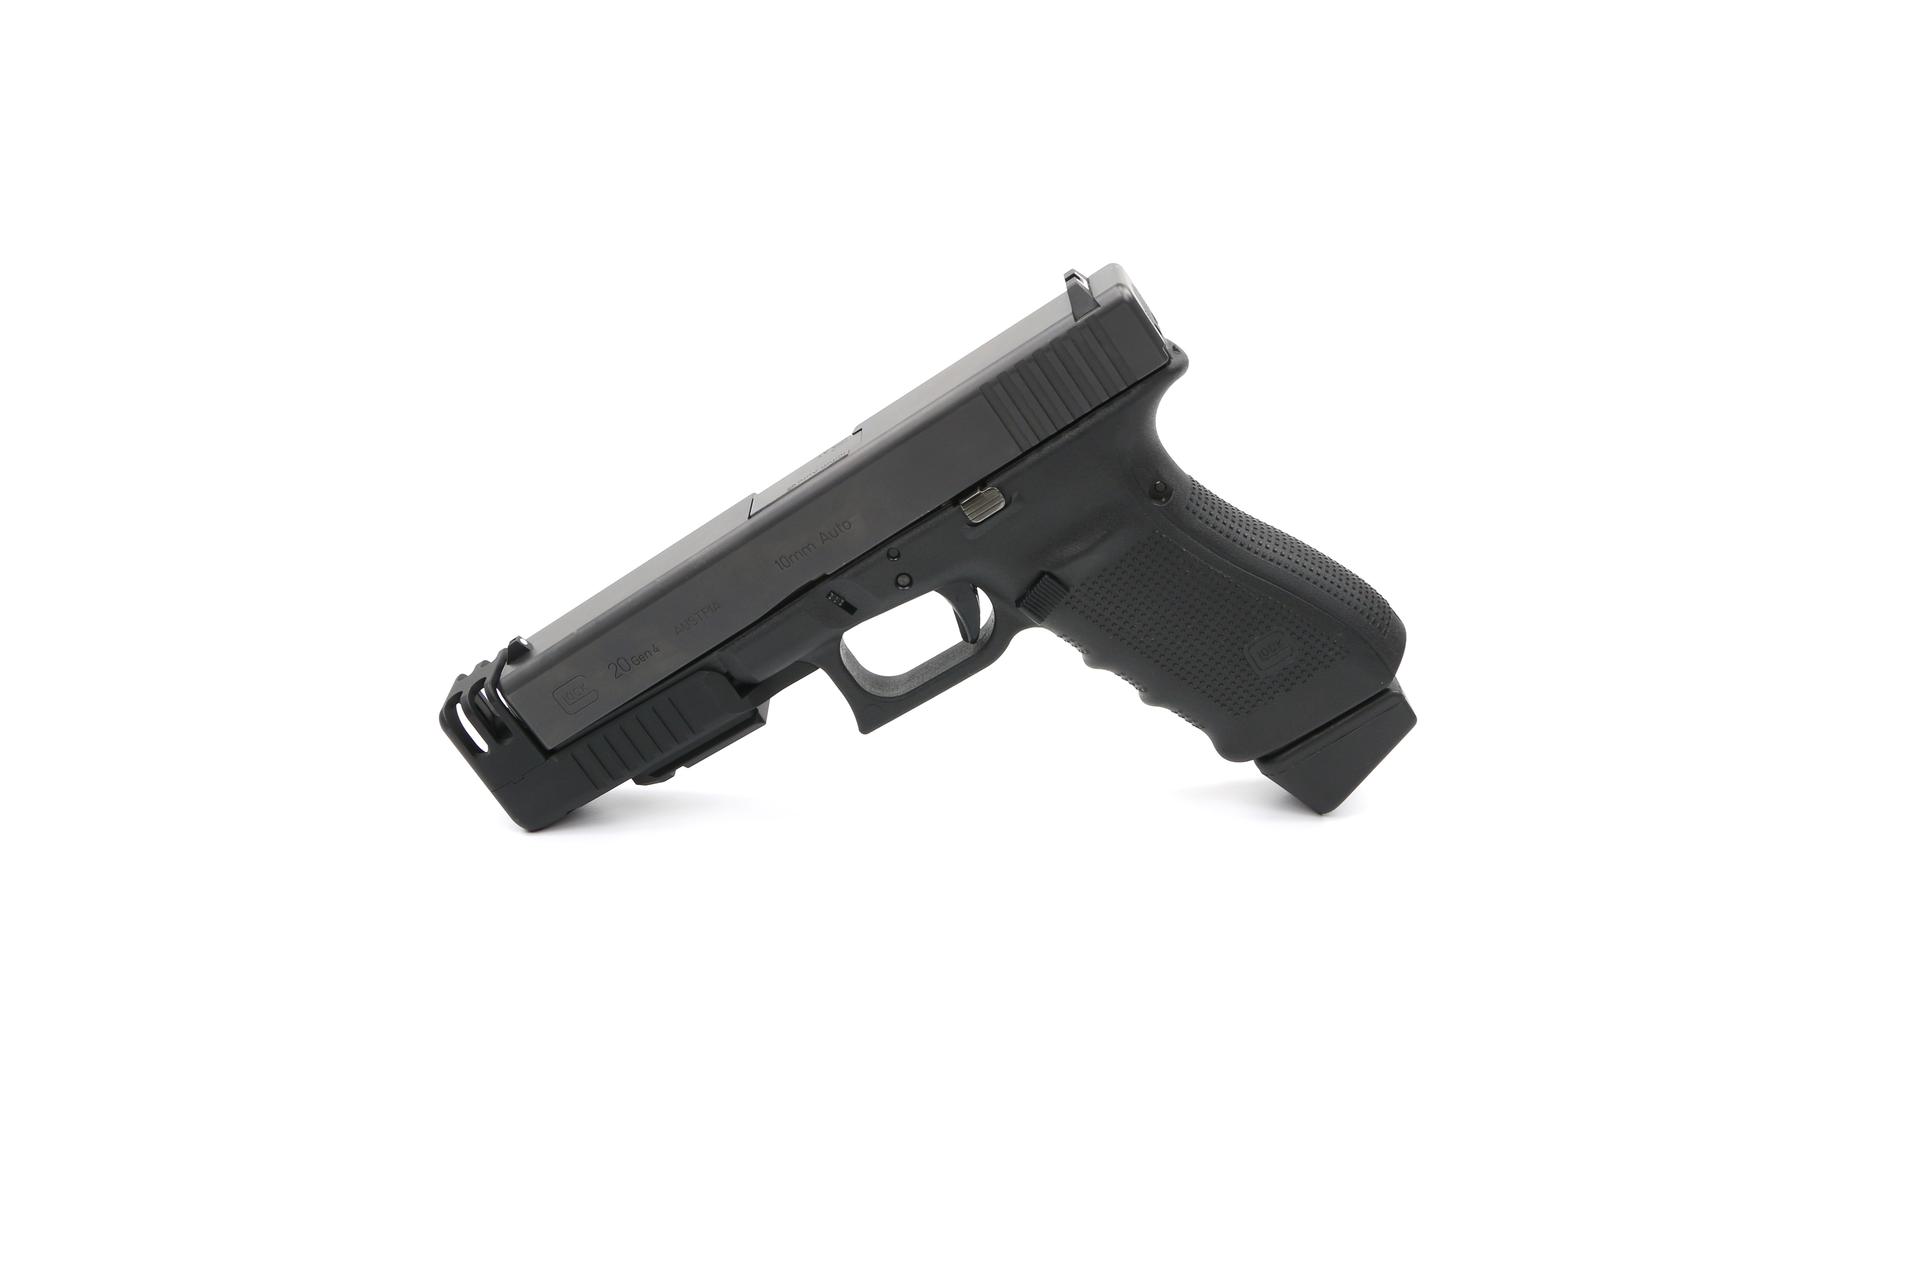 This Glock Stand Off Device for the Glock 20 and 21 models features an inte...